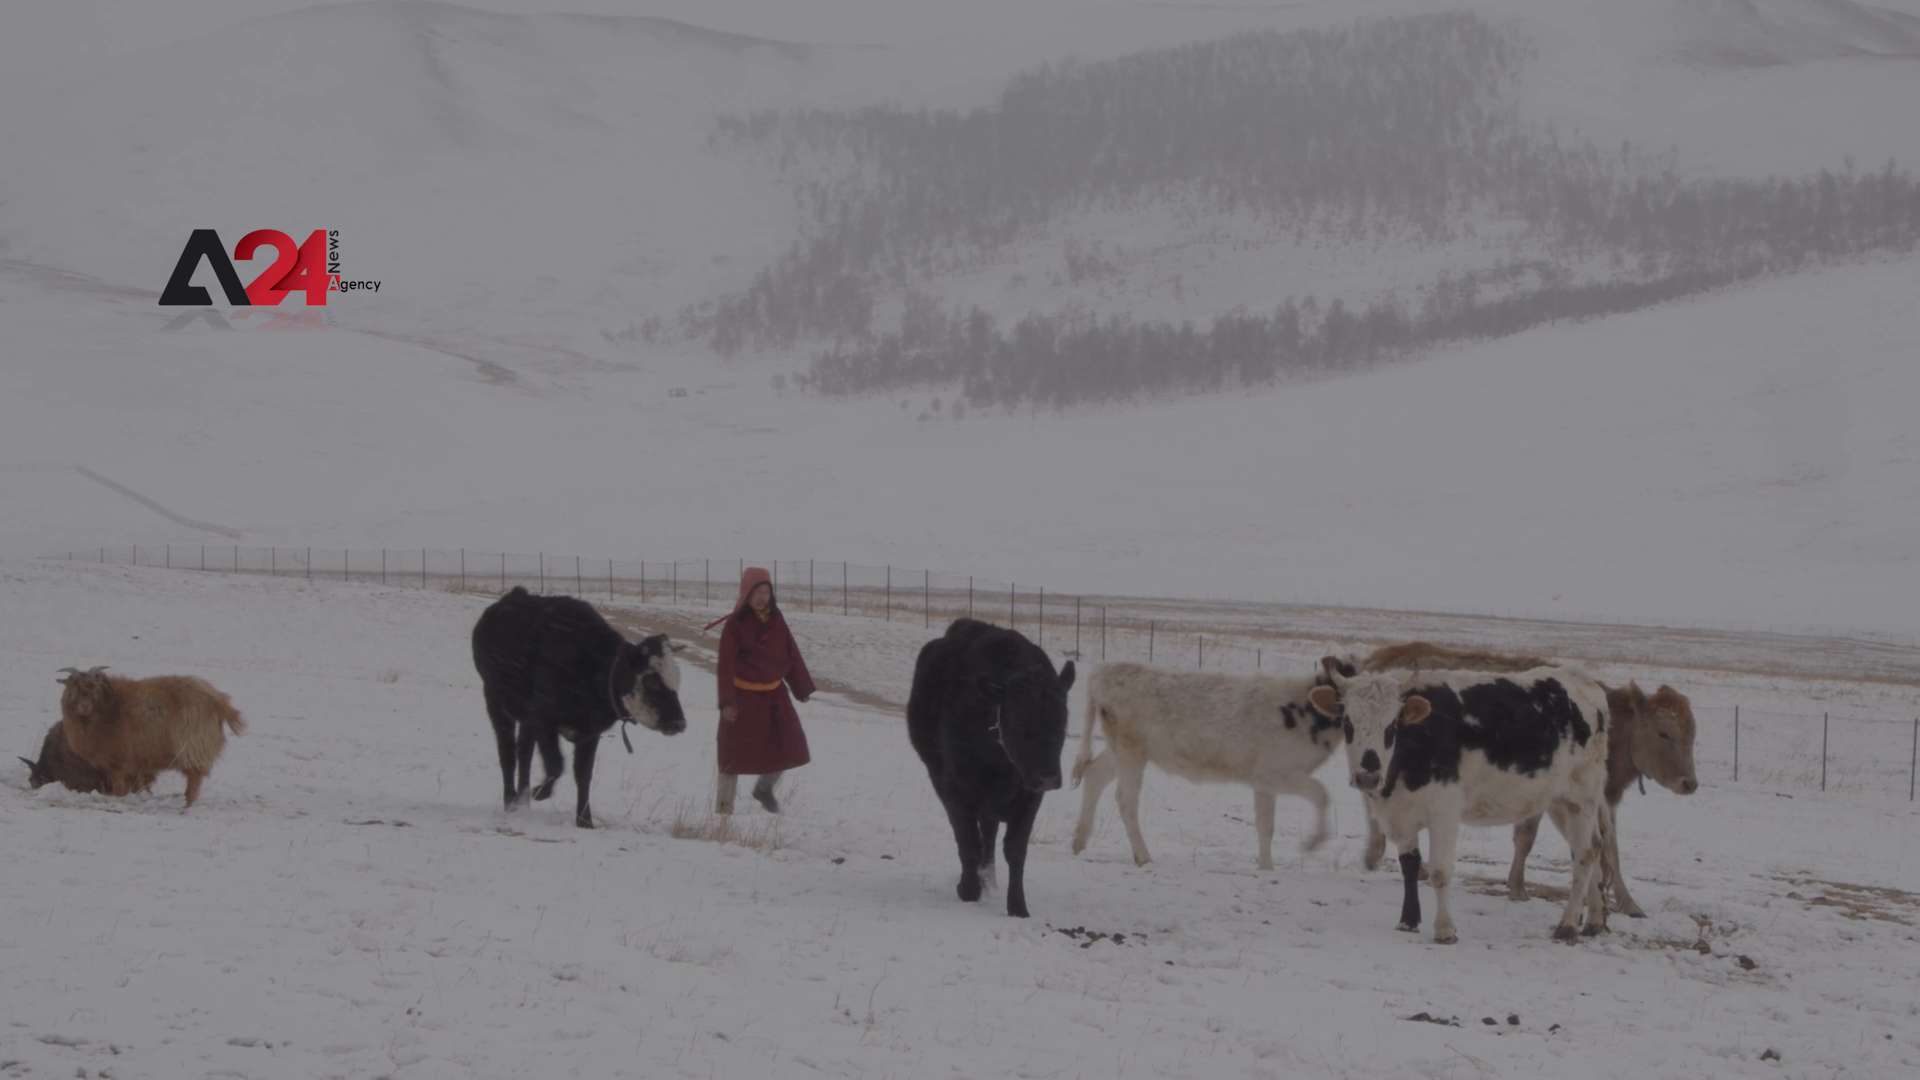 Mongolia – Gov’t-led efforts improve livestock sector; alleviate suffering of herders during winter